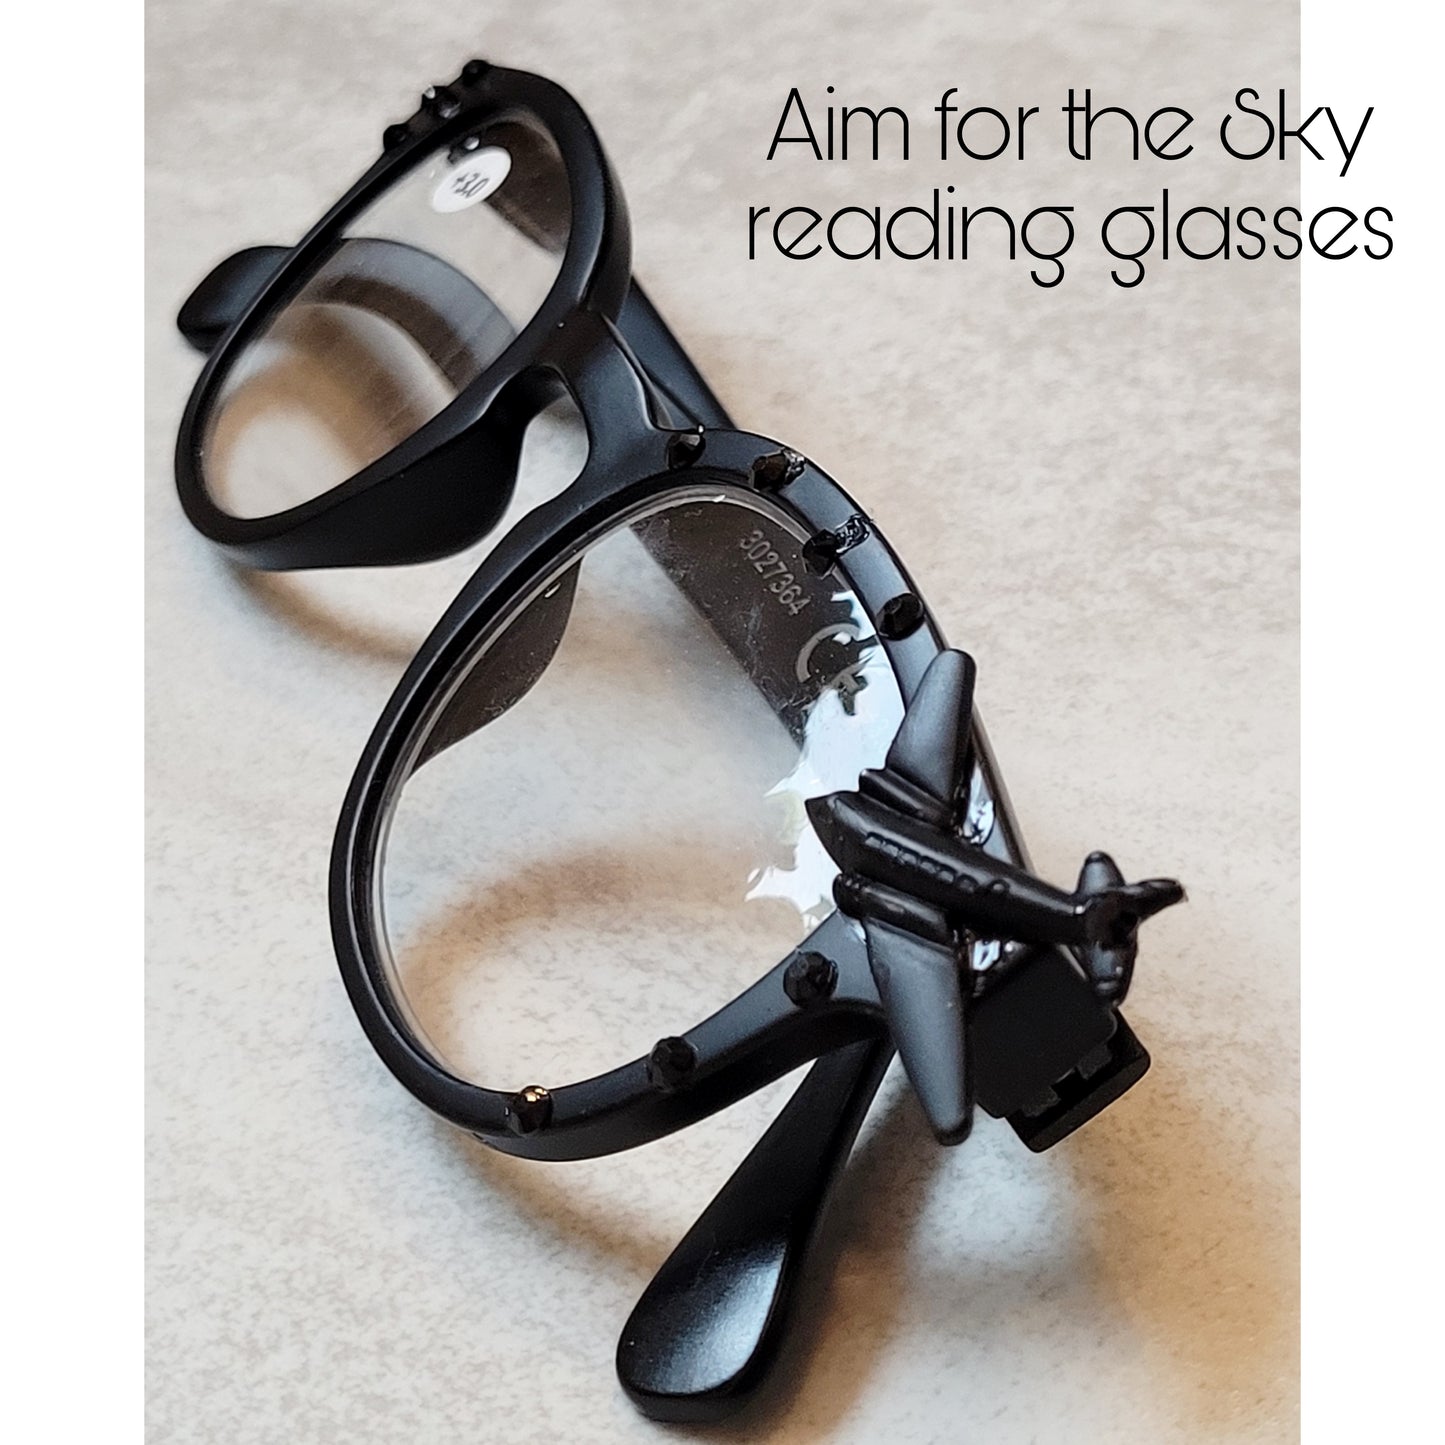 The Aim for the Sky reading glasses, limited edition unisex model (+3,0)